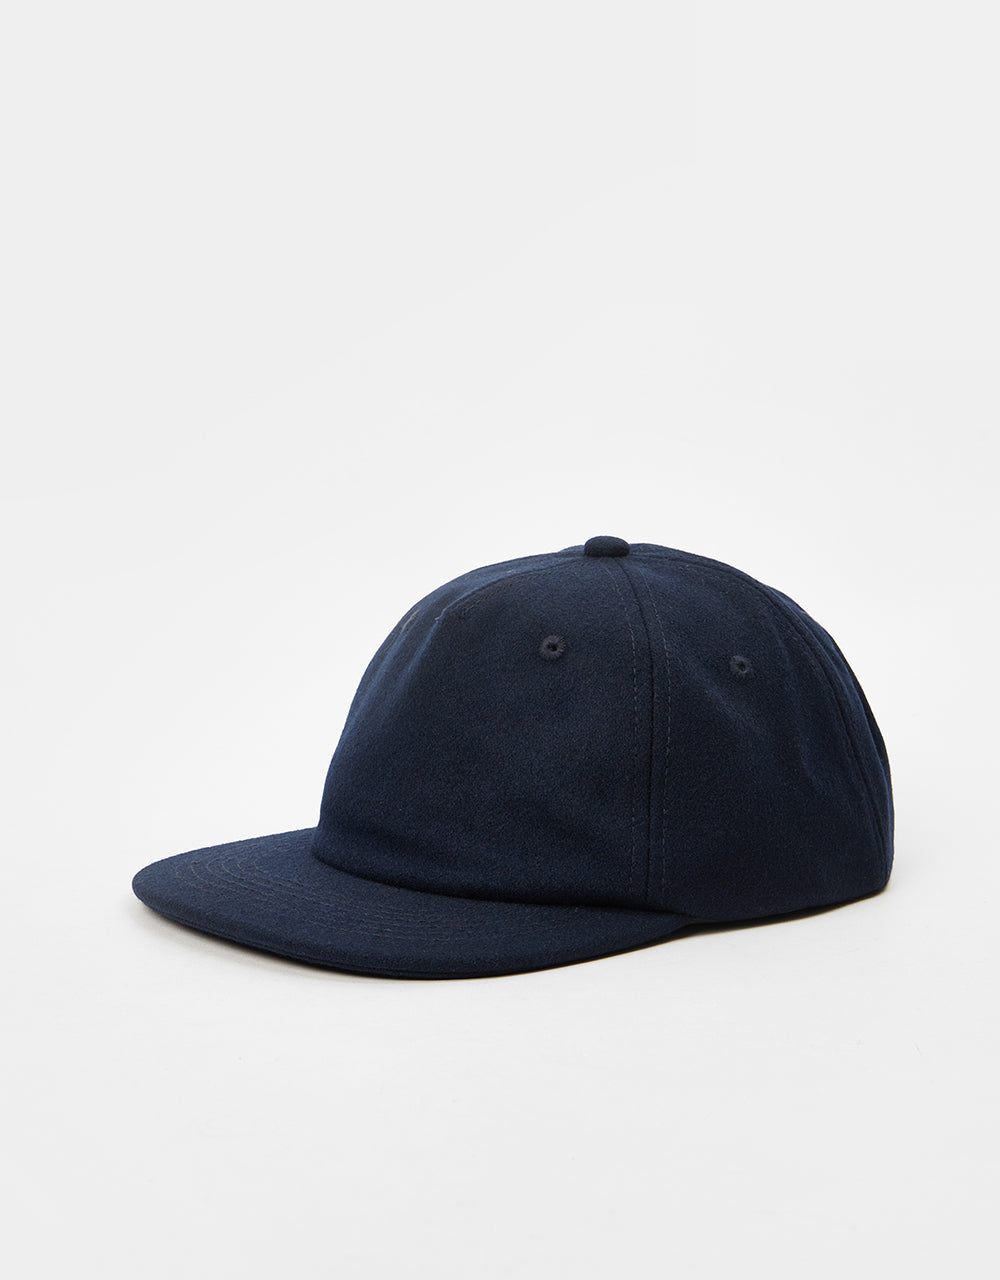 Route One Unstructured Melton Wool Cap - Navy